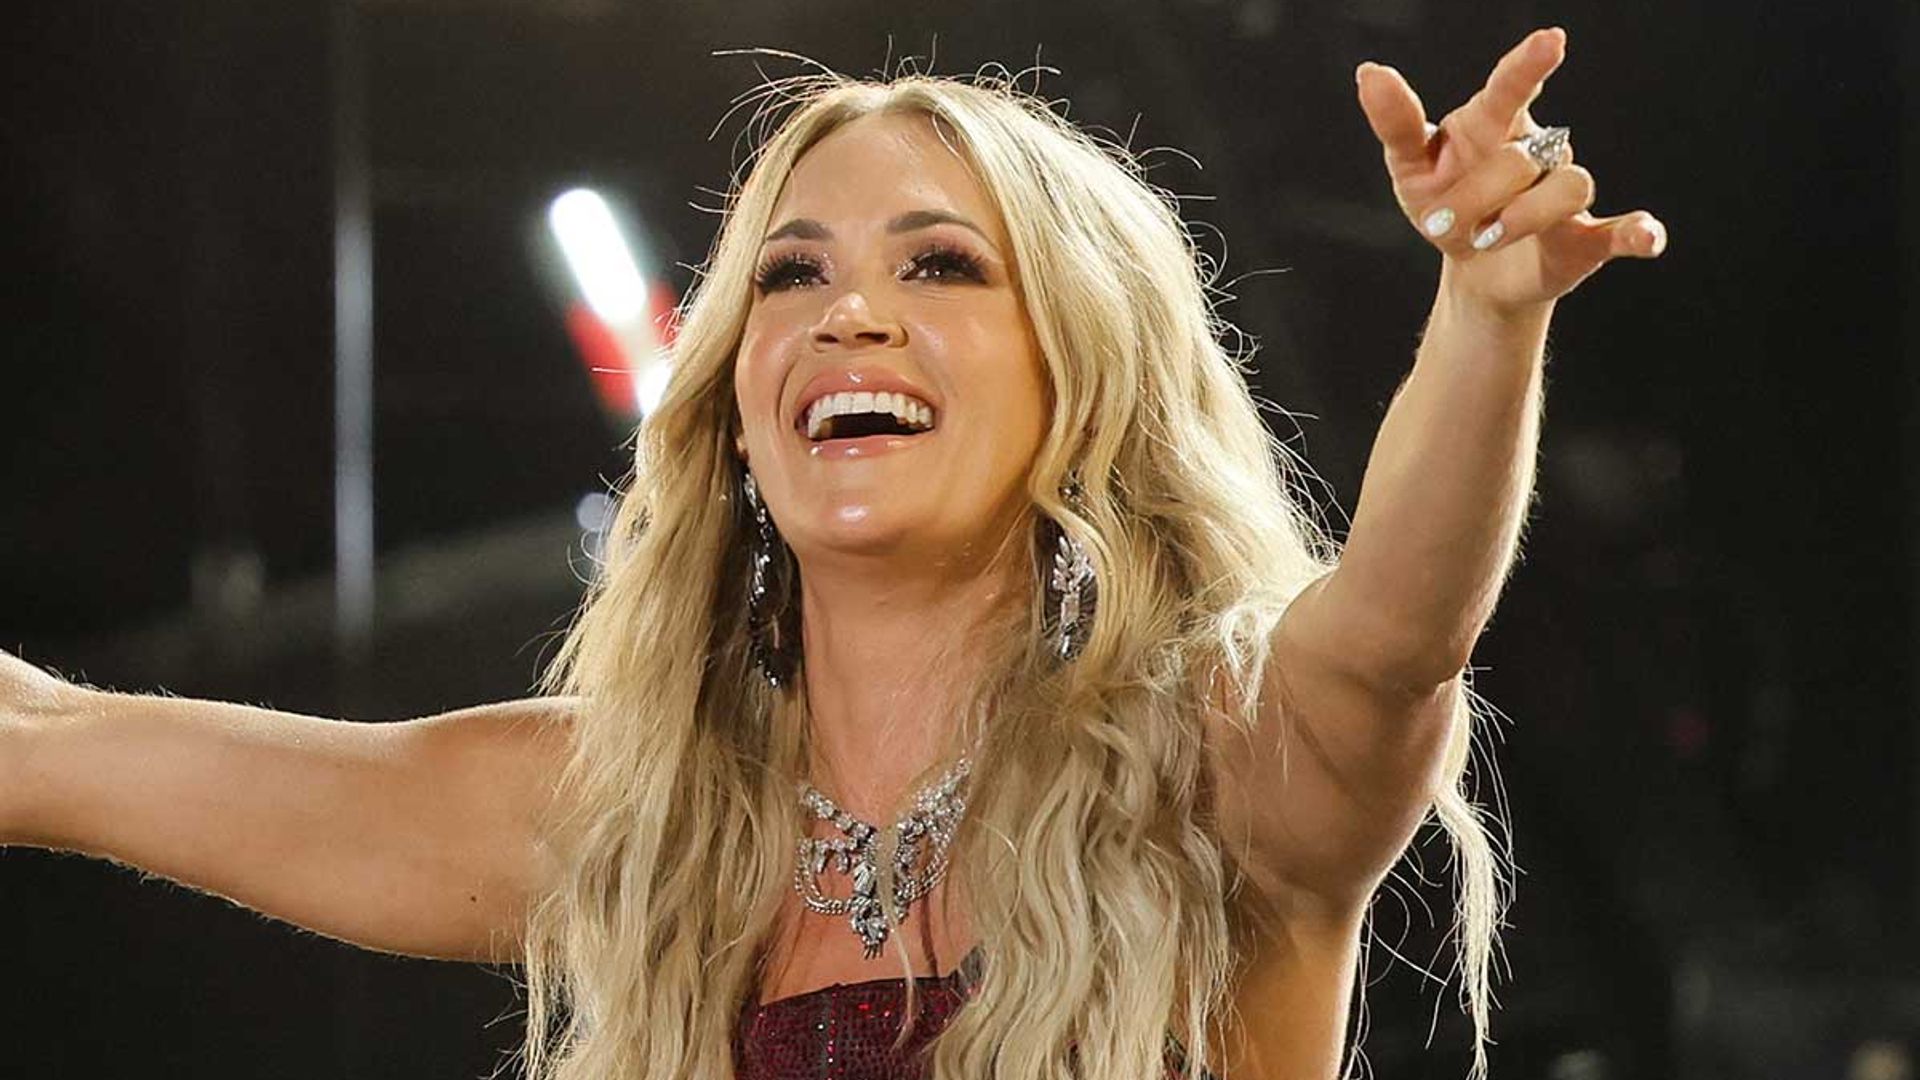 Carrie Underwood and family have three huge reasons to celebrate